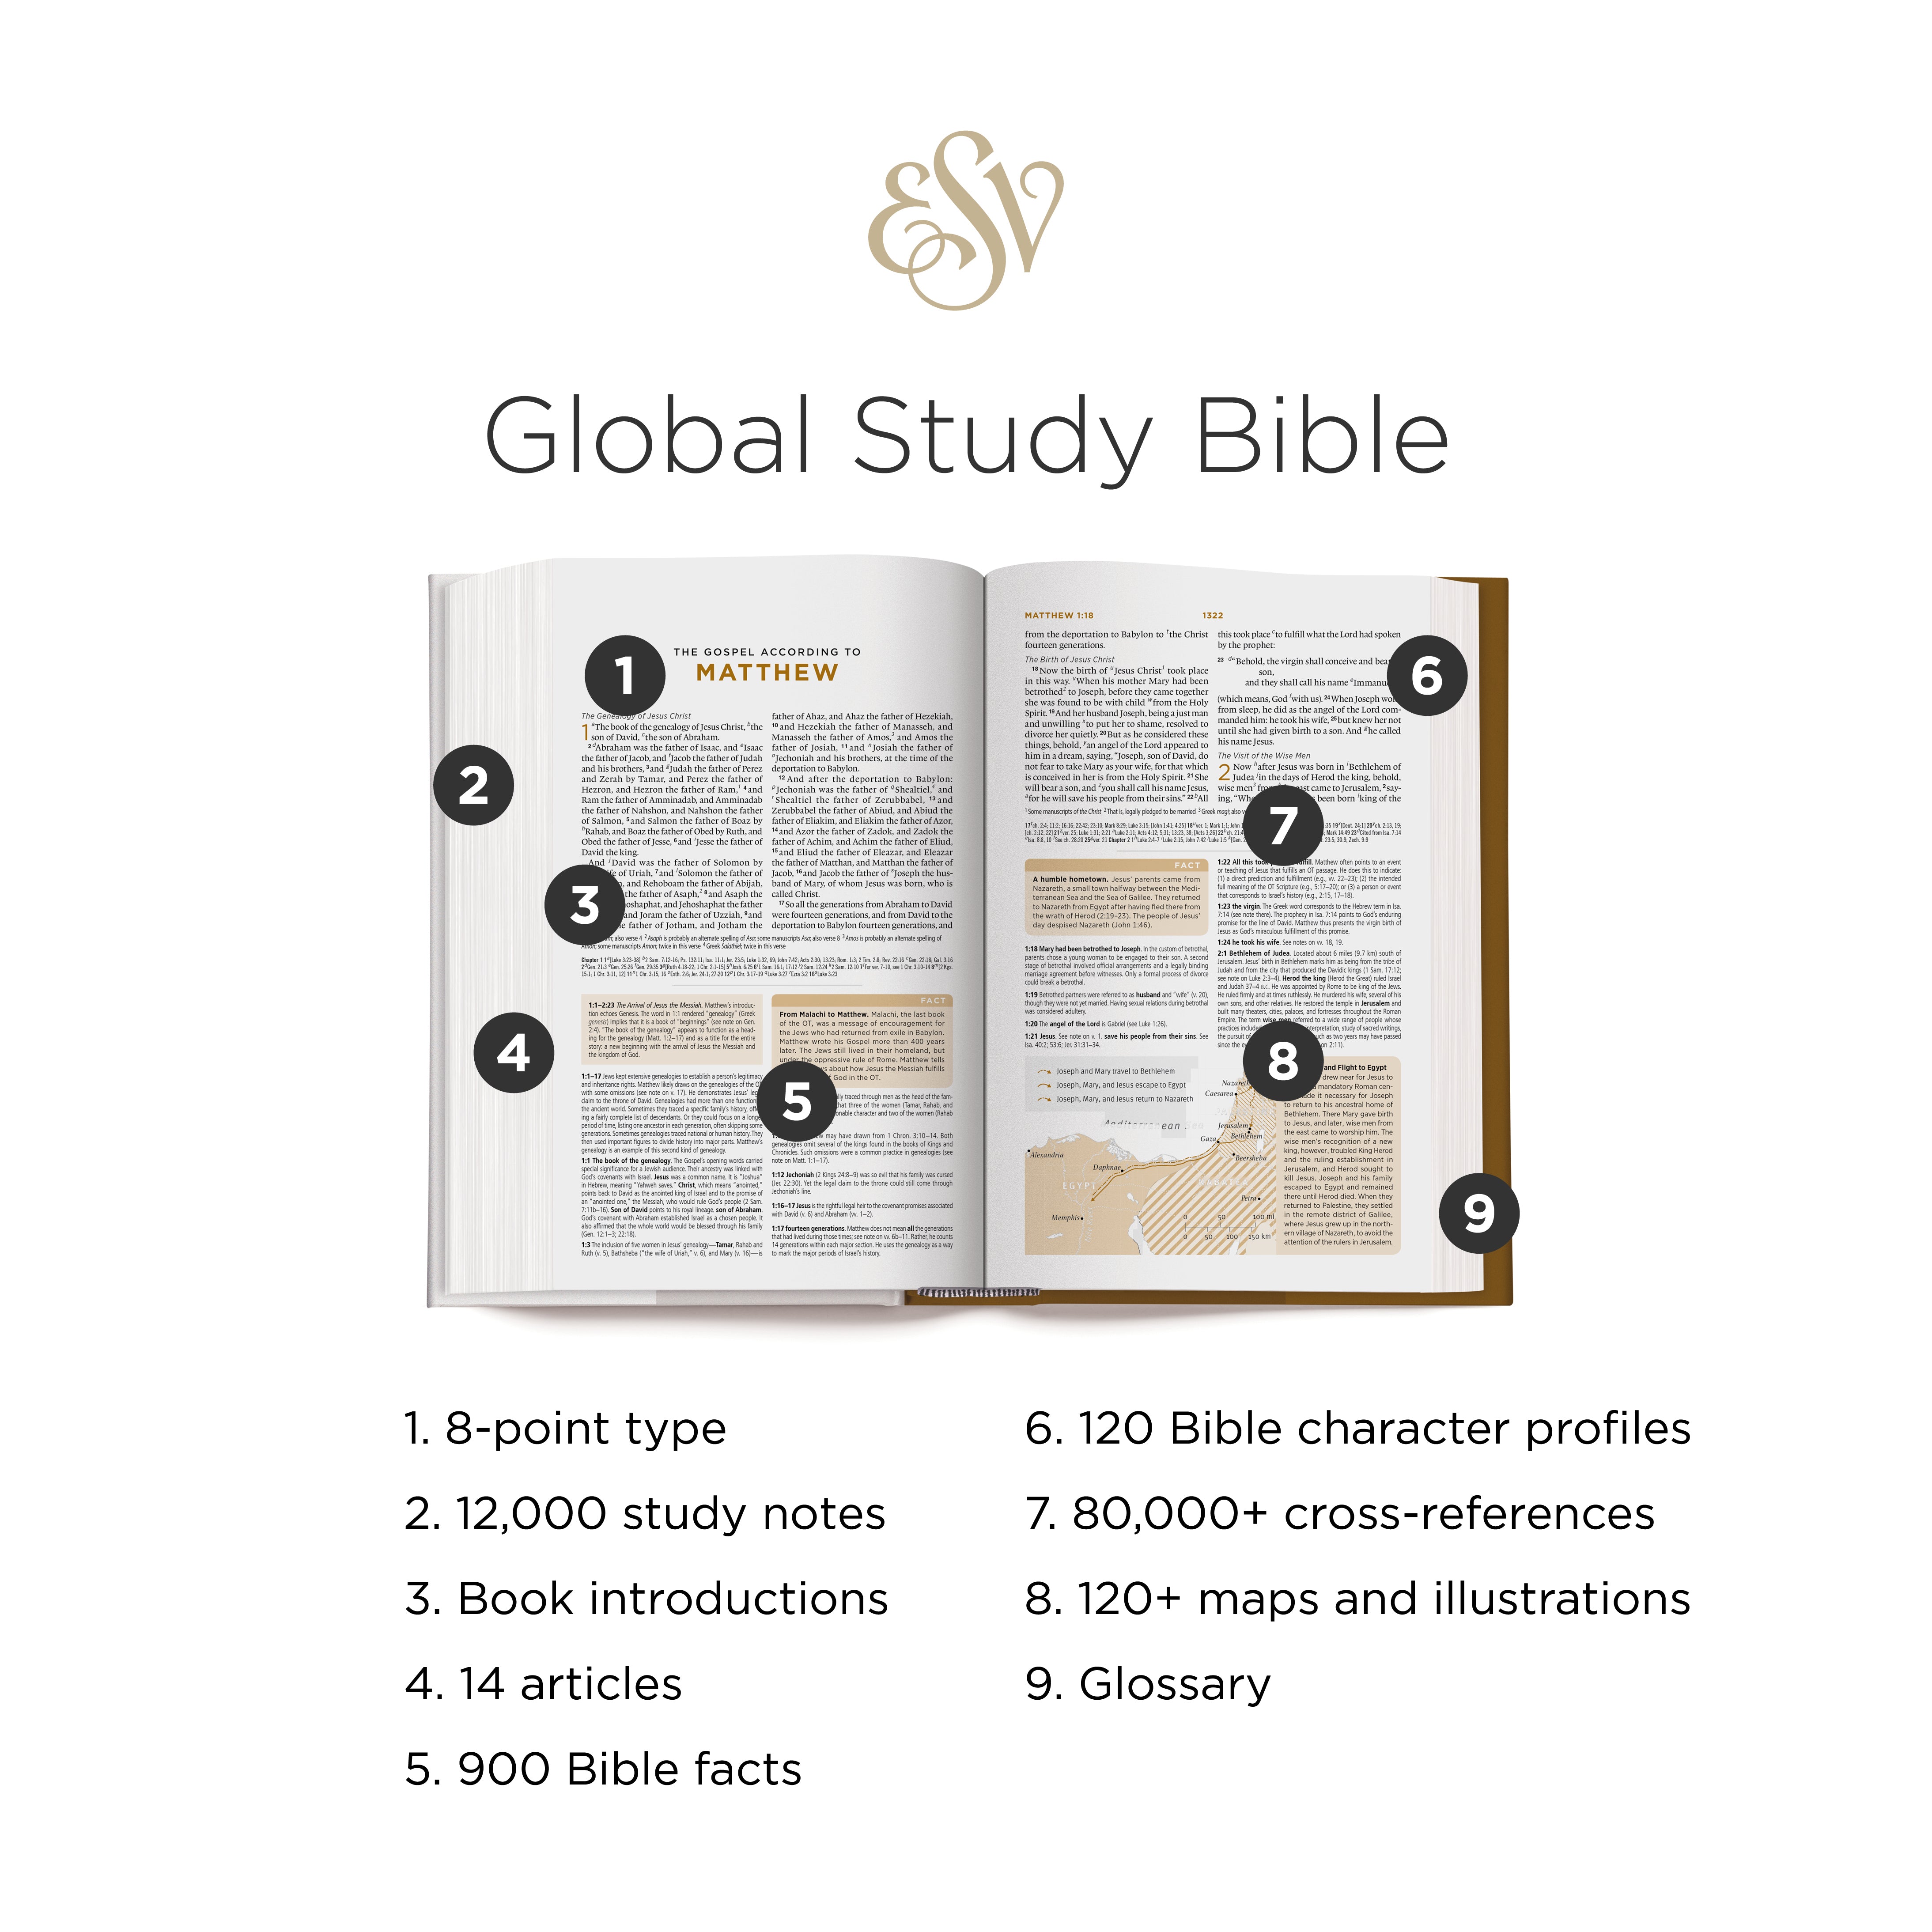 GLOBAL STUDY BIBLE FEATURES